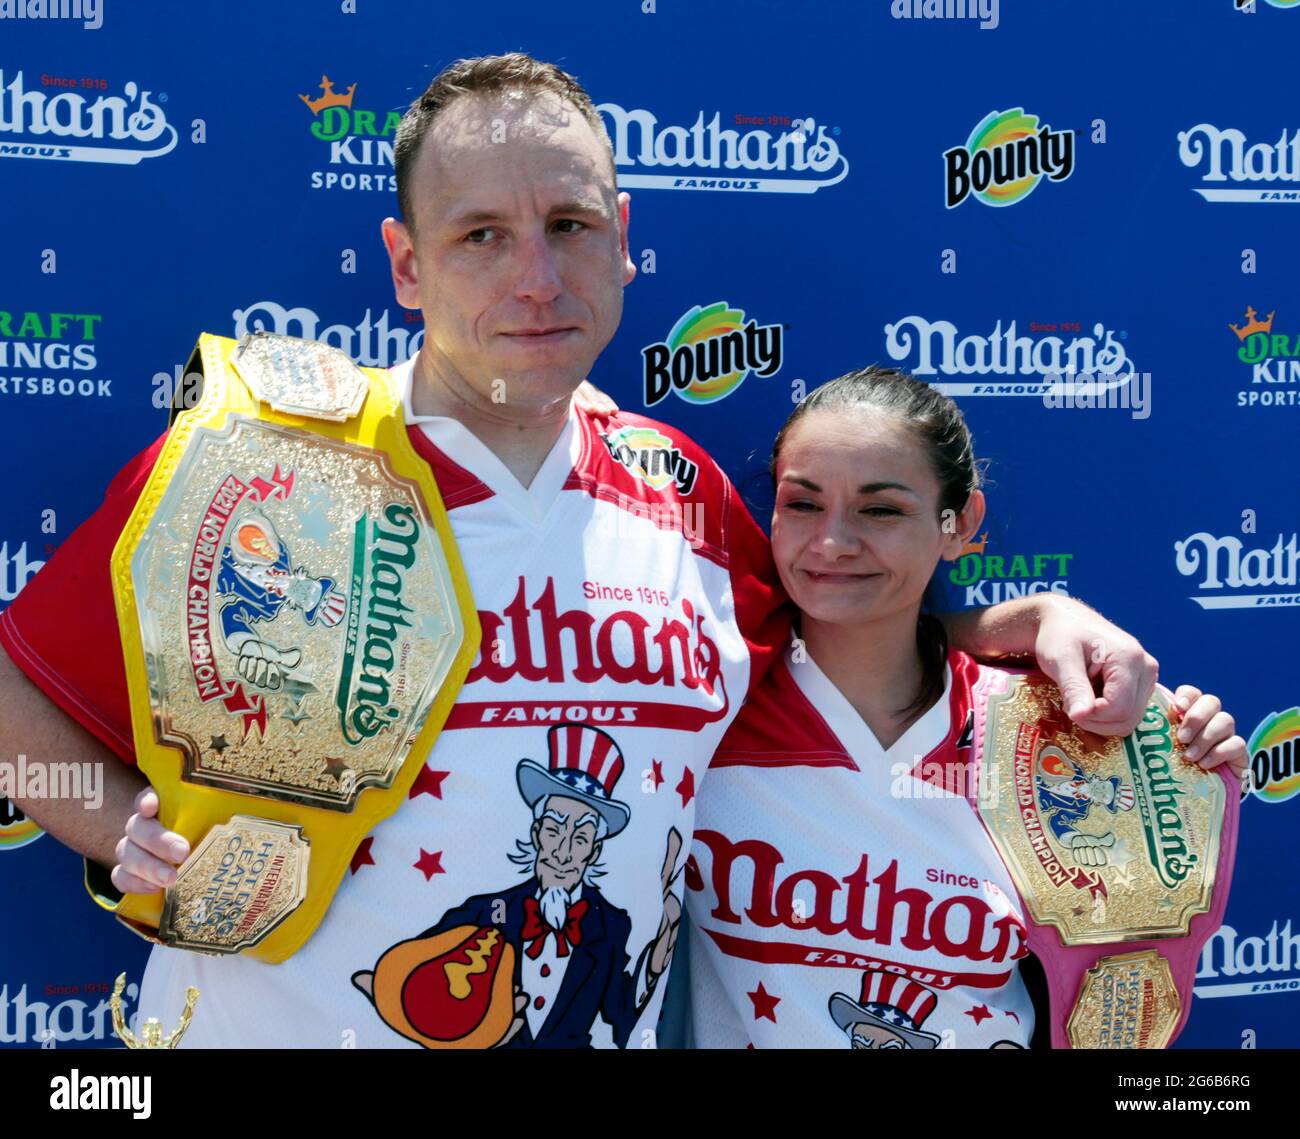 Coney Island, New York, USA. 4th July, 2021. (L-R) Joey Chestnut and Michelle Lesco win the 2021Nathan's Hot Dog Eating Competition with appearances by New York City Mayor Bill De Blasio, Brooklyn Attorney General Eric Gonzalez and others celebrating the Fourth of July on July 4, 2021 in the Coney Island section of New York City. Credit: Mpi43/Media Punch/Alamy Live News Stock Photo